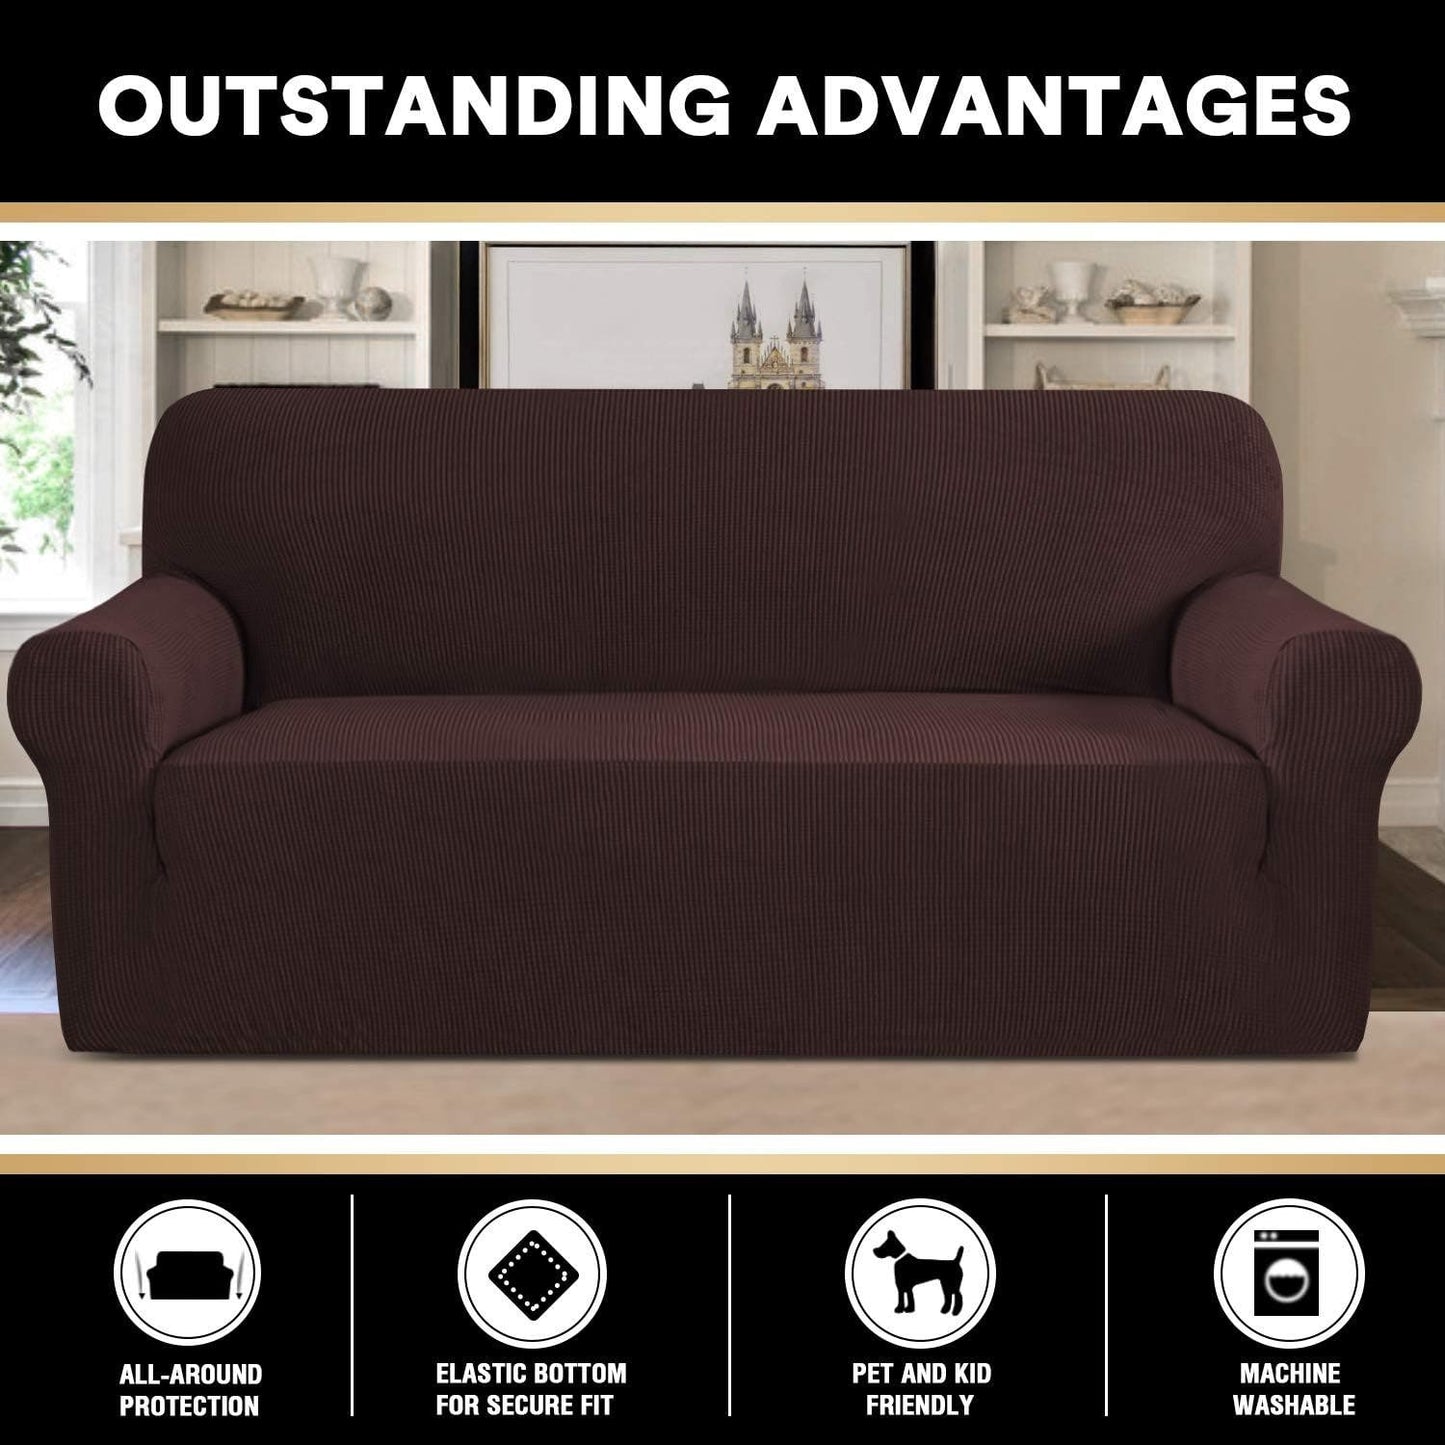 Couch Covers (1 Piece) 3 Cushion Couch, Stretch Non-Slip Elastic, Brown, 74"-88"